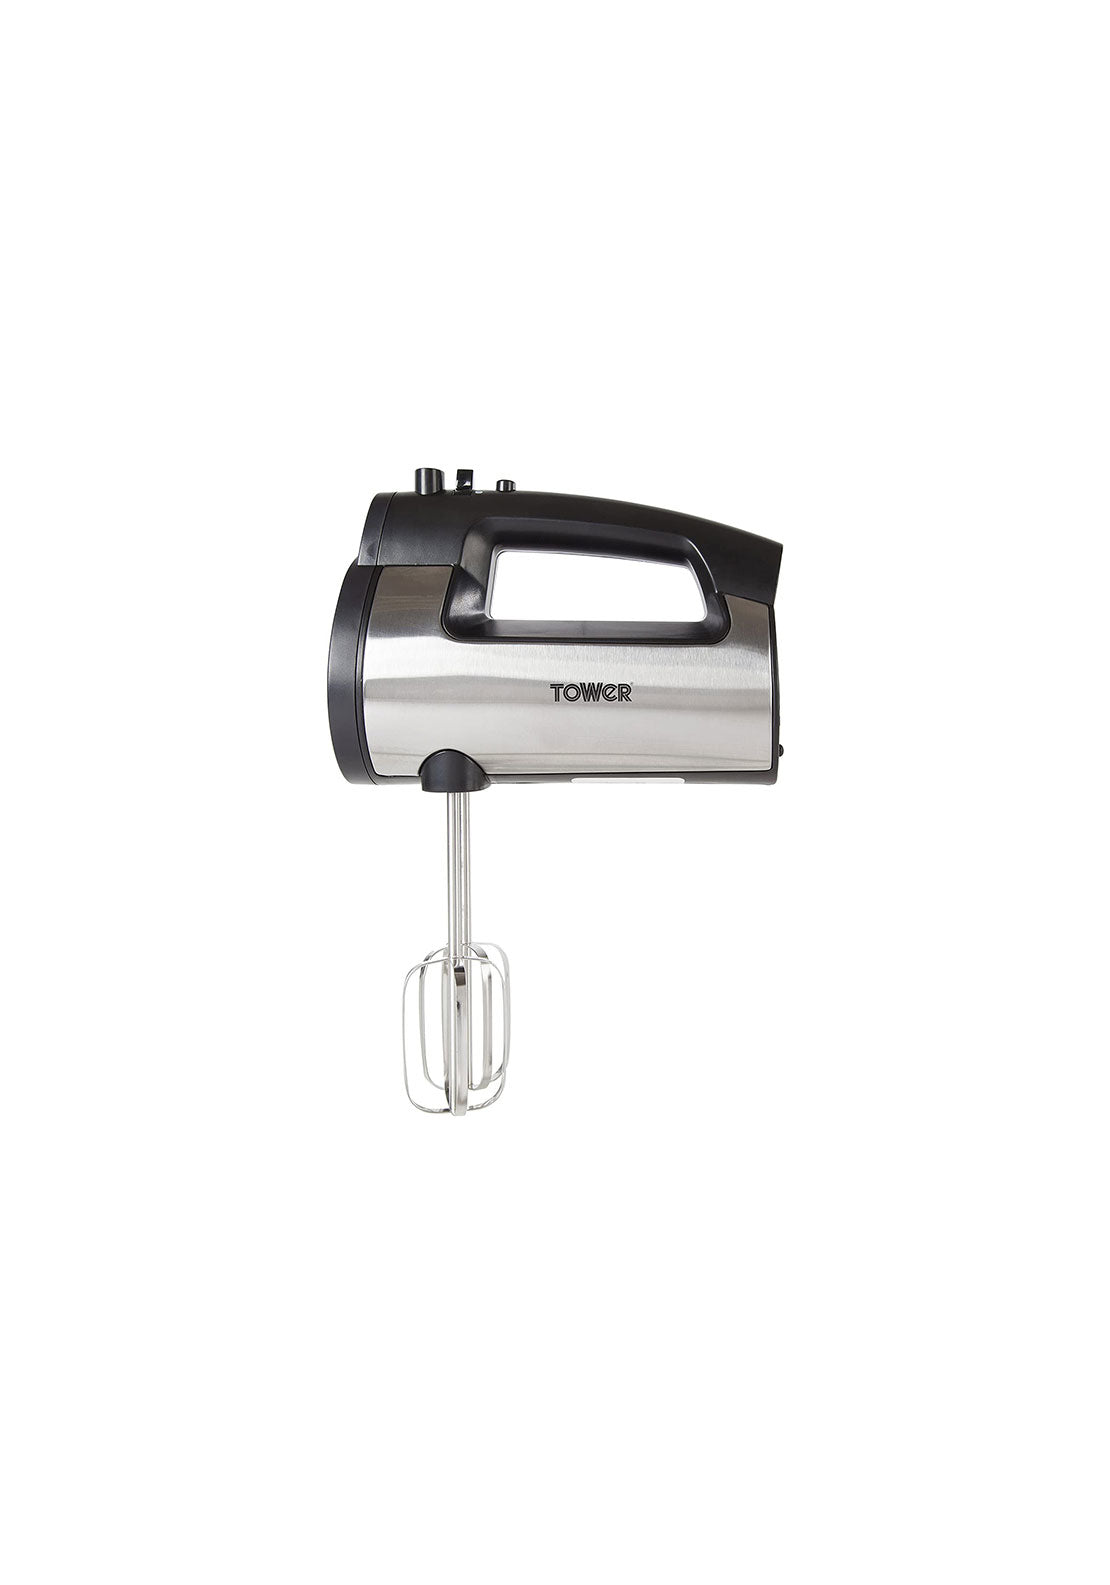 Tower 300W Stainless Steel Hand Mixer | T12016 2 Shaws Department Stores